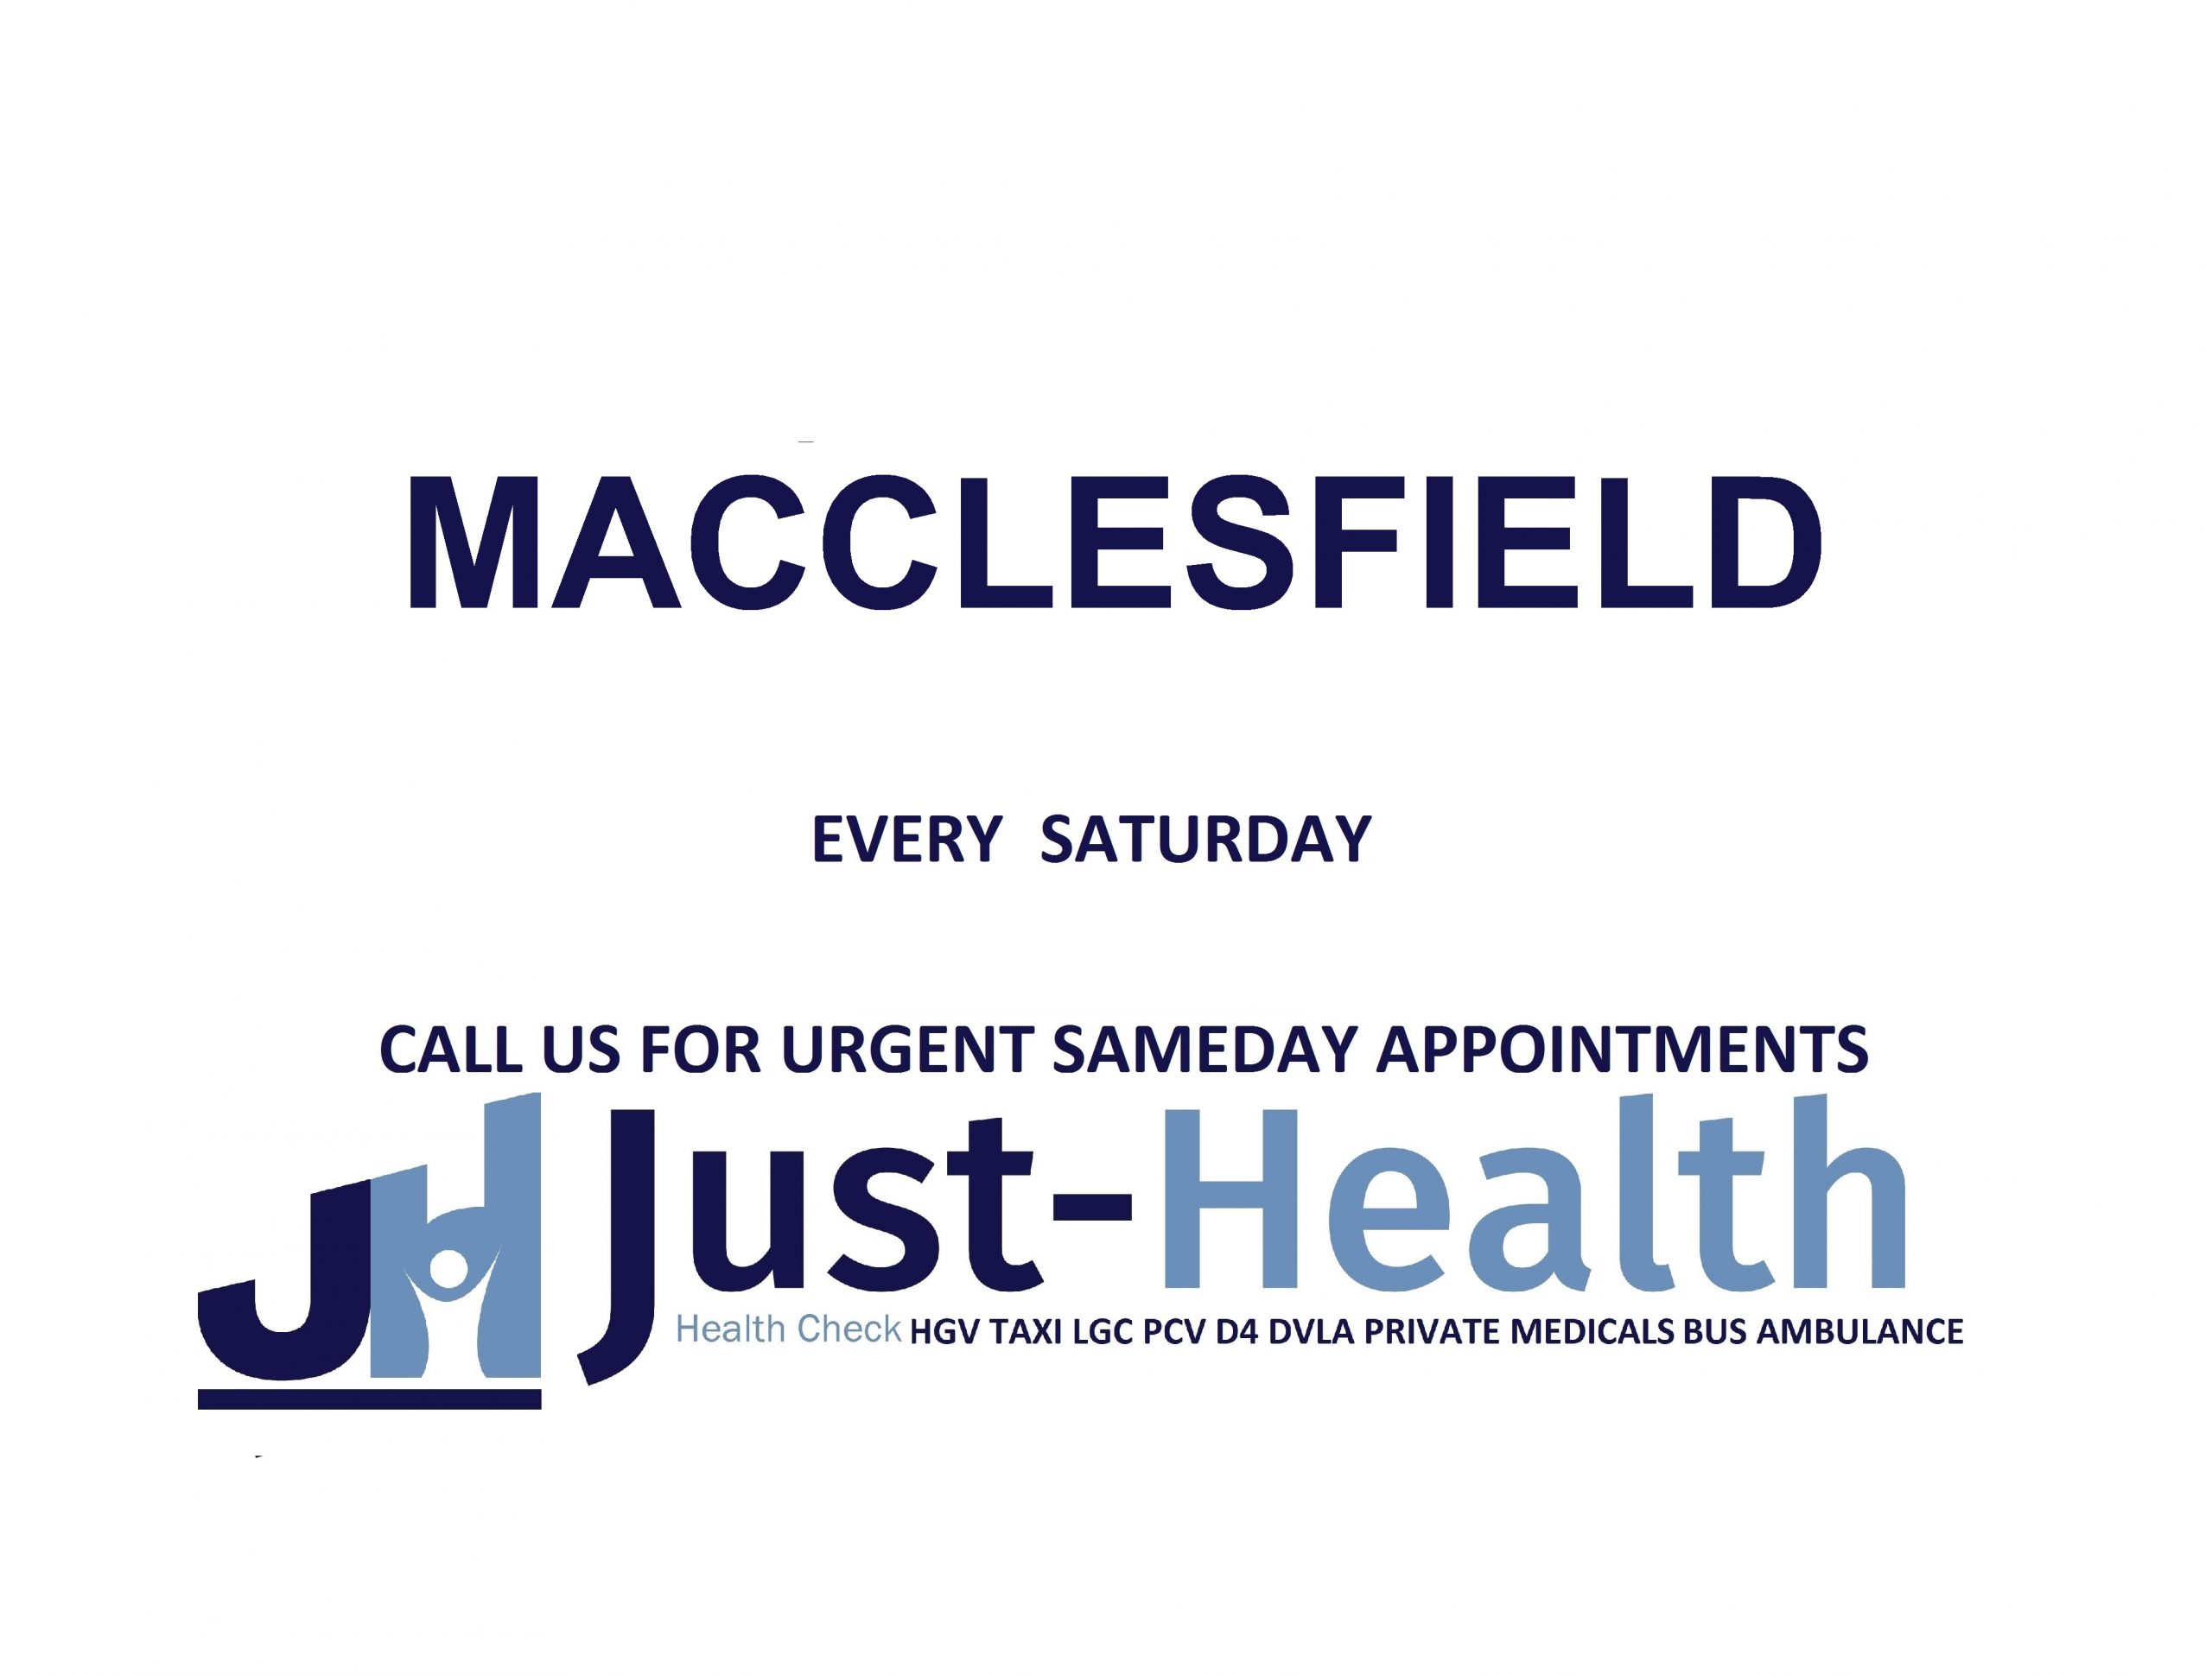 Just Health Taxi Driver Medical Doncaster Driver Medicals & Private Gp services